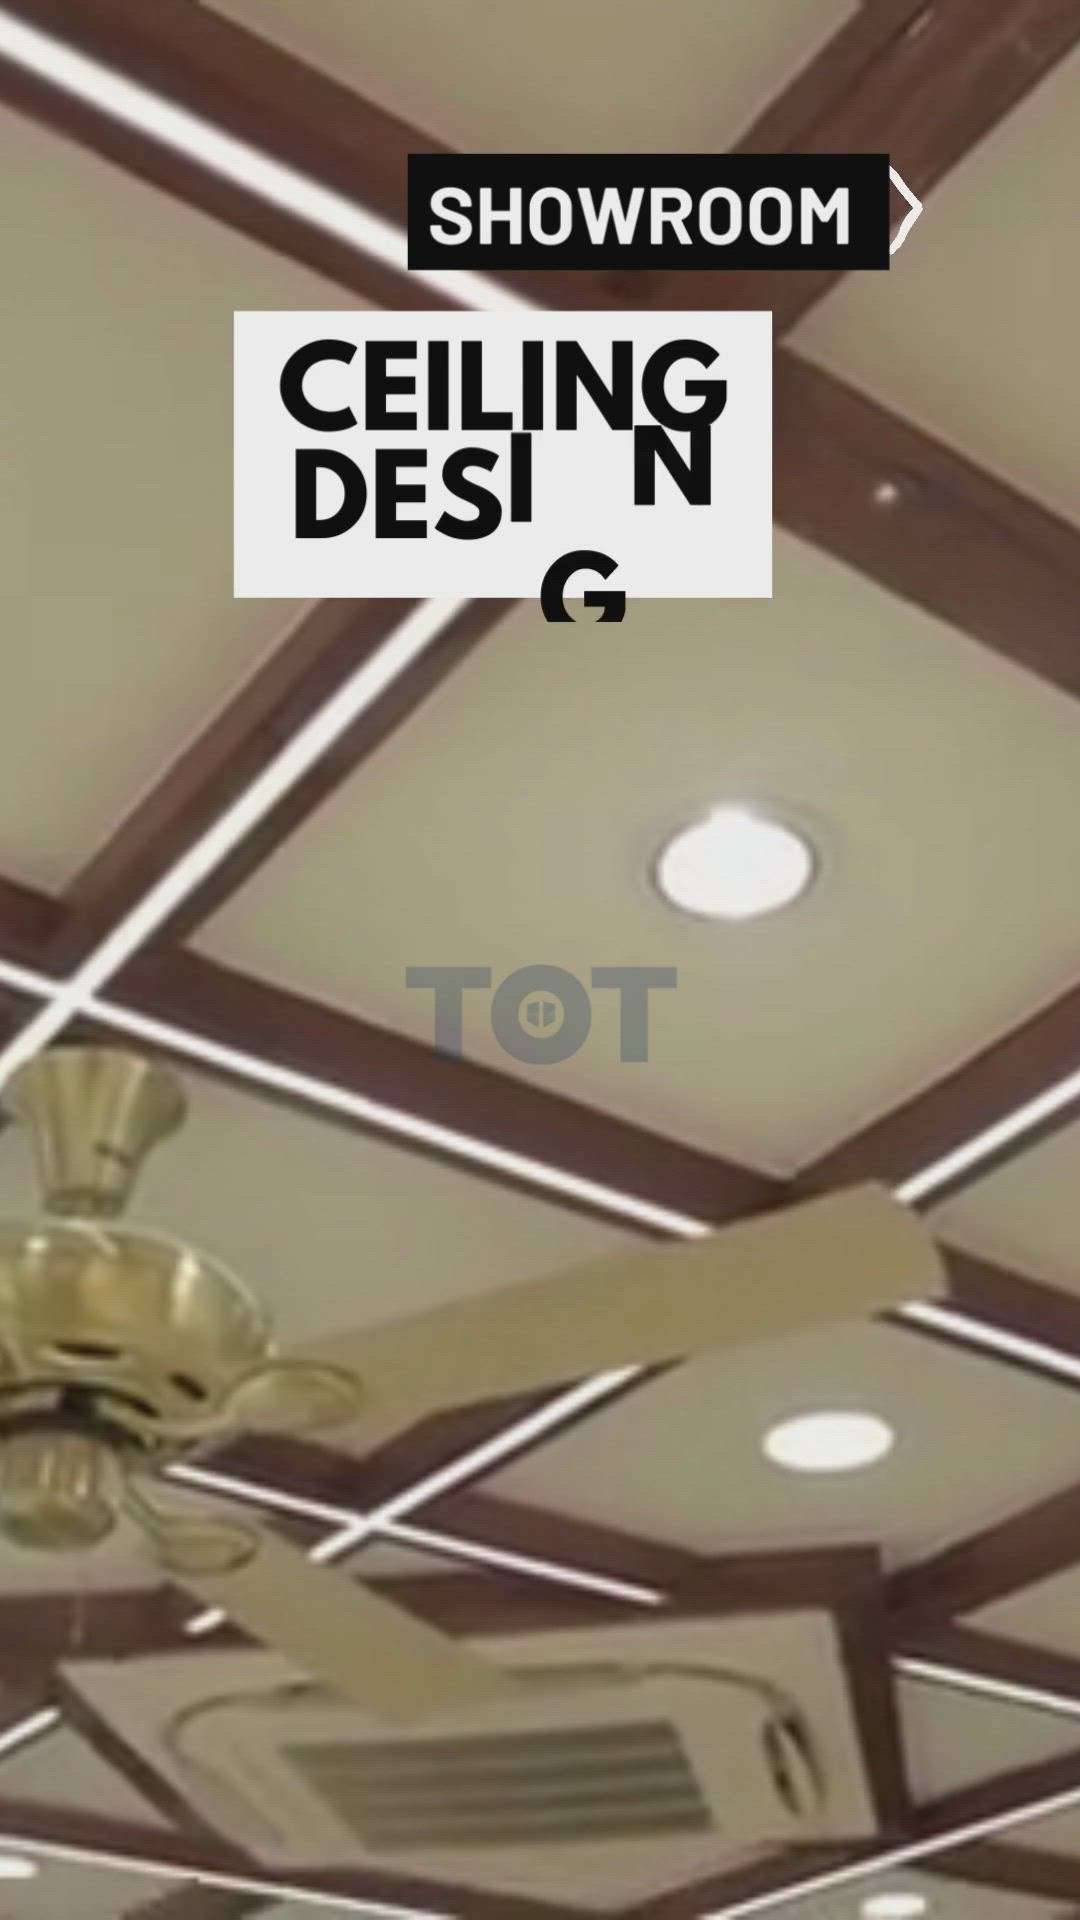 Ceiling Designs by Building Supplies Talk of the Town space , Gurugram | Kolo